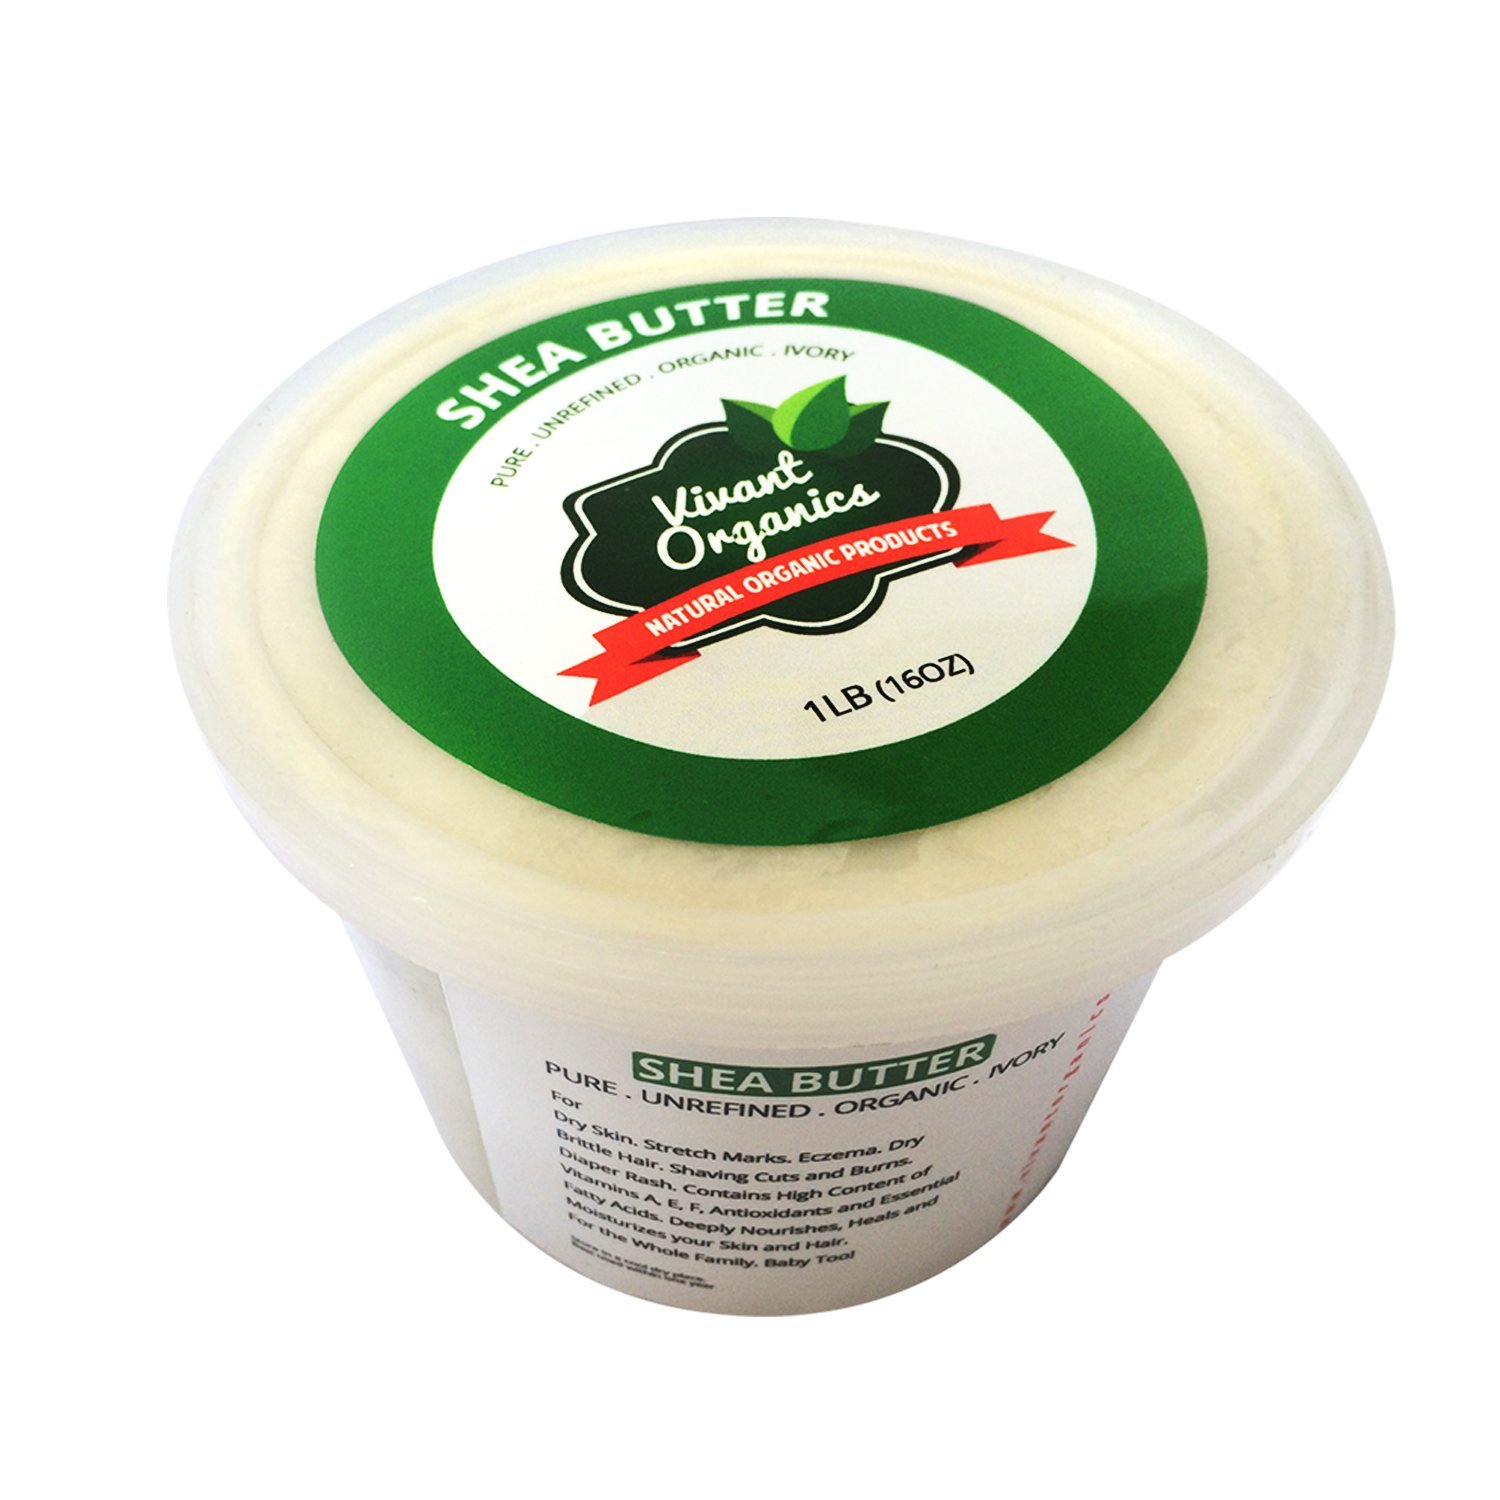 Pure Organic Ivory Shea butter from Vivant Organics, featured @homelifeabroad.com